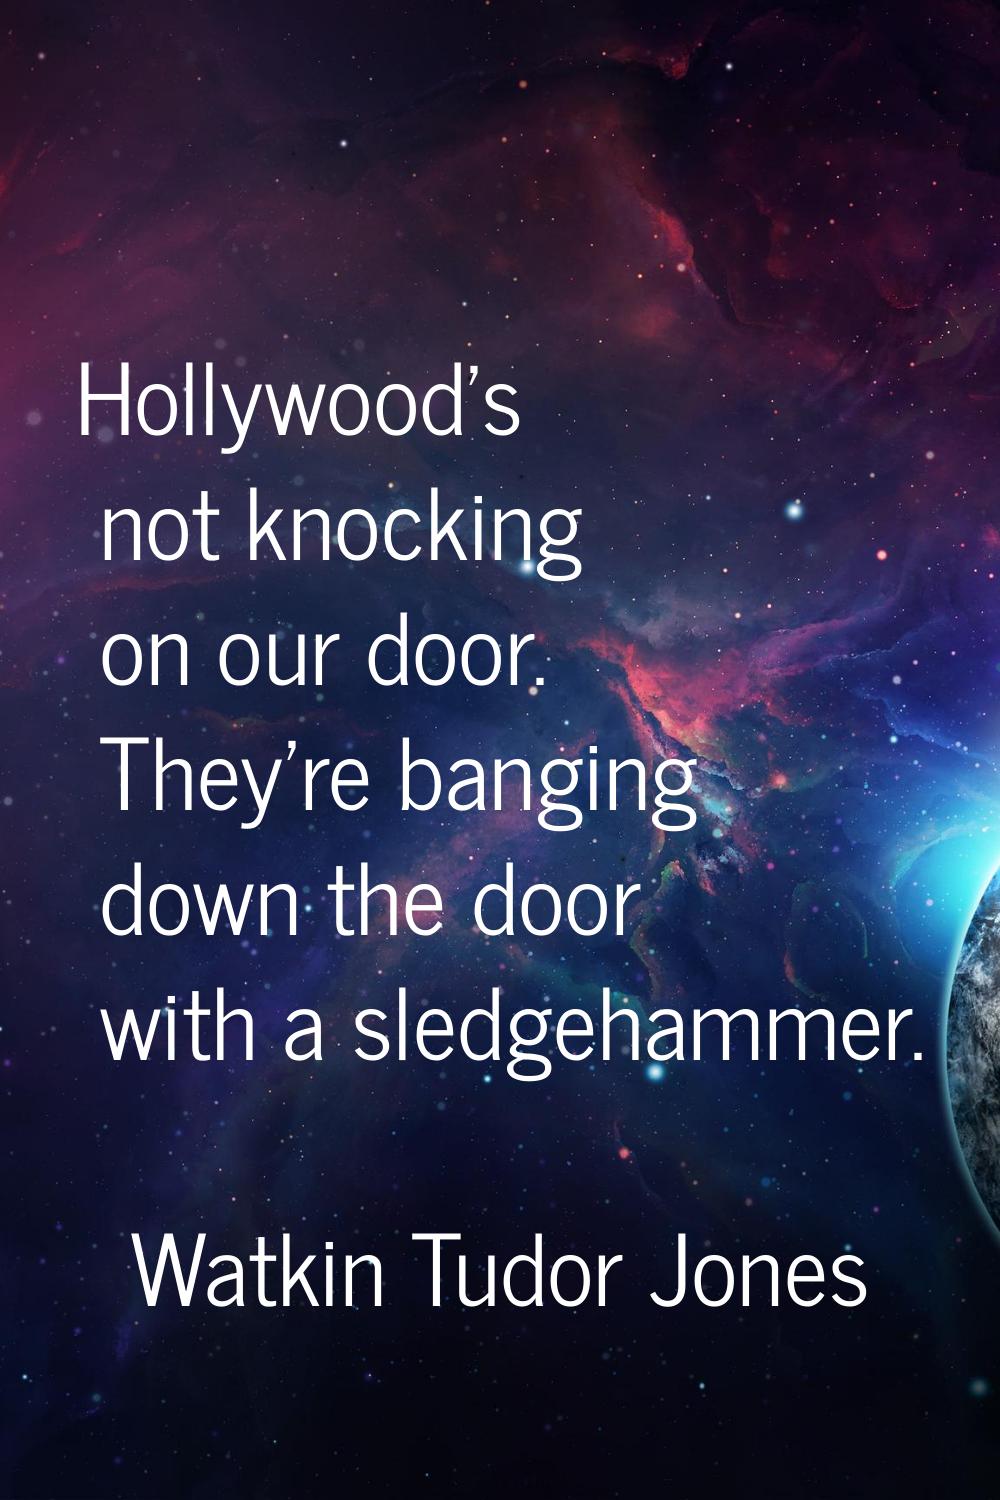 Hollywood's not knocking on our door. They're banging down the door with a sledgehammer.